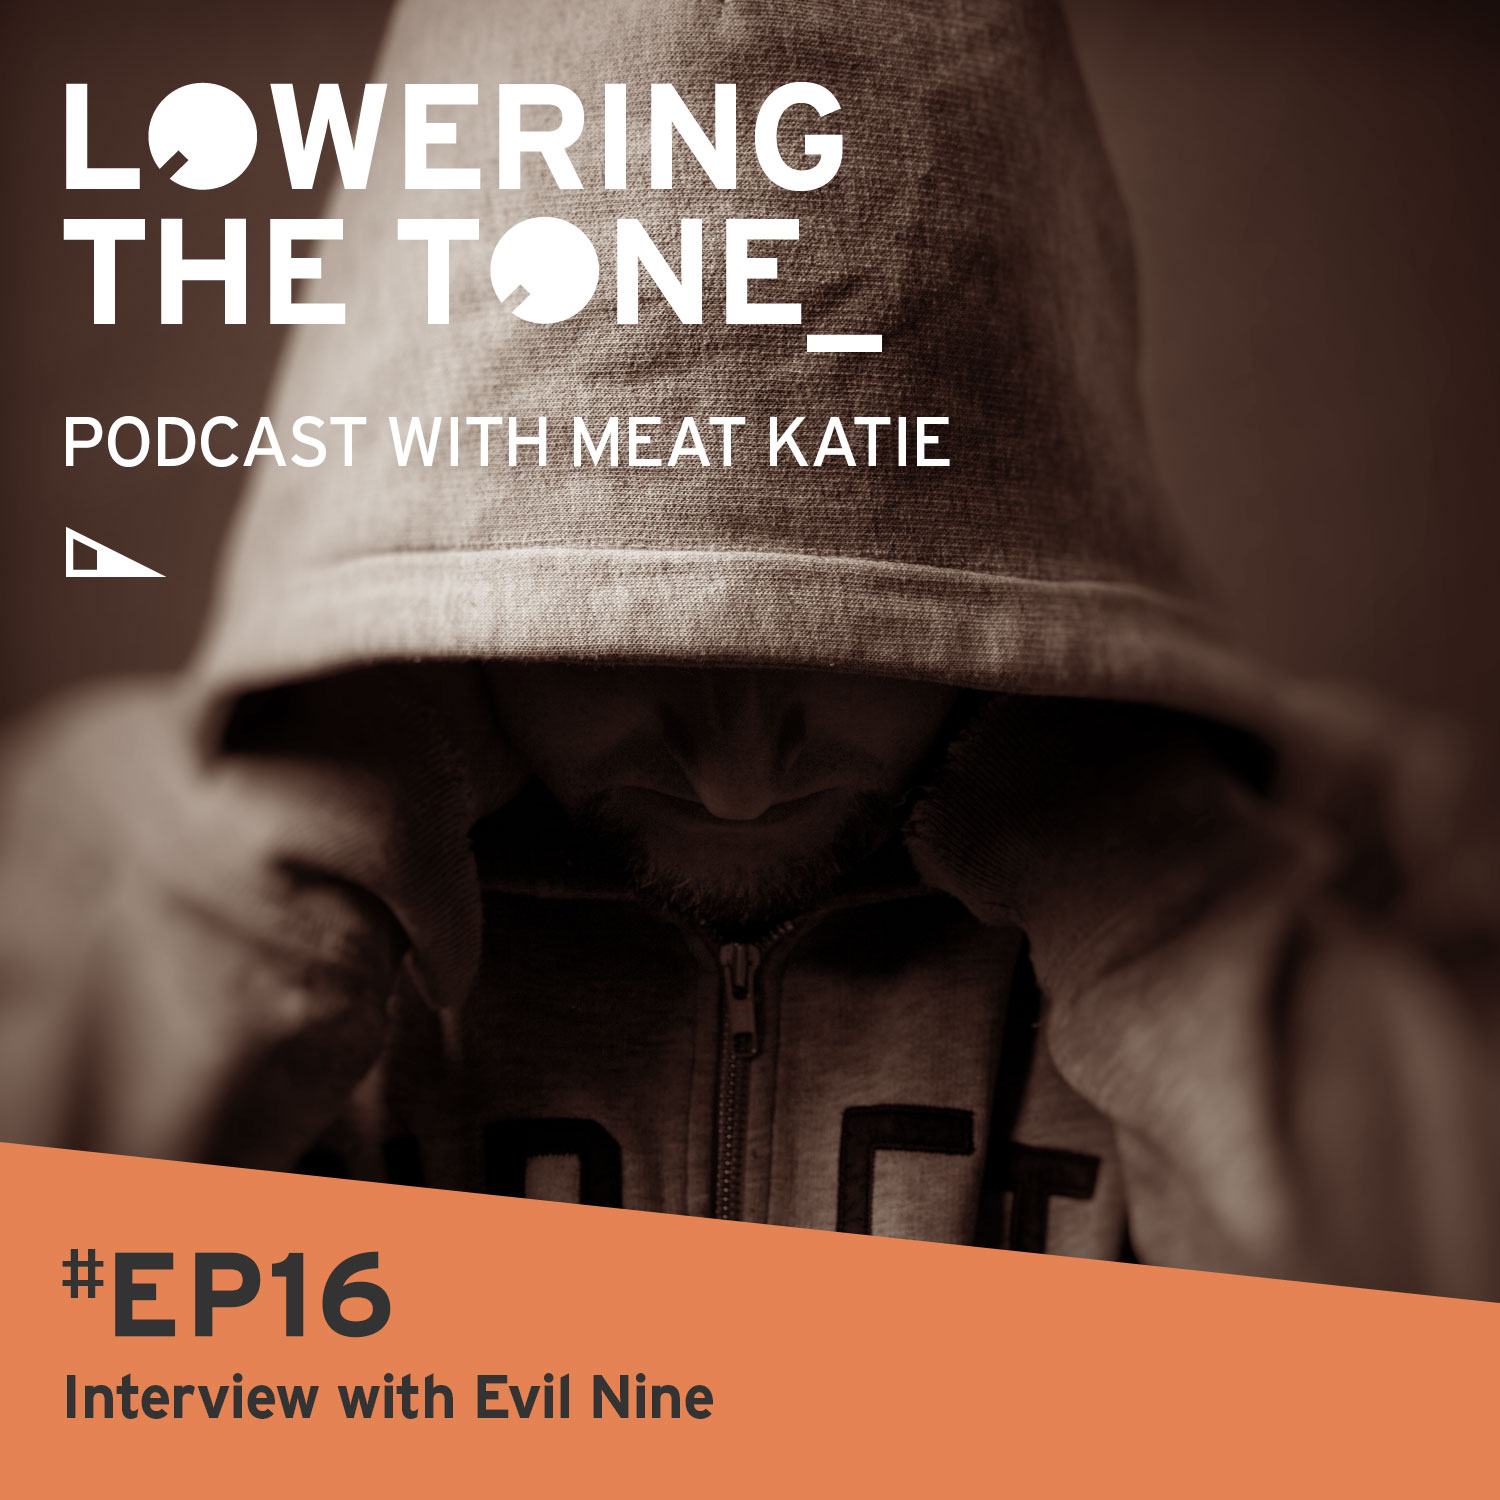 Meat Katie 'Lowering The Tone' Episode 16 - (Interview with Evil Nine)